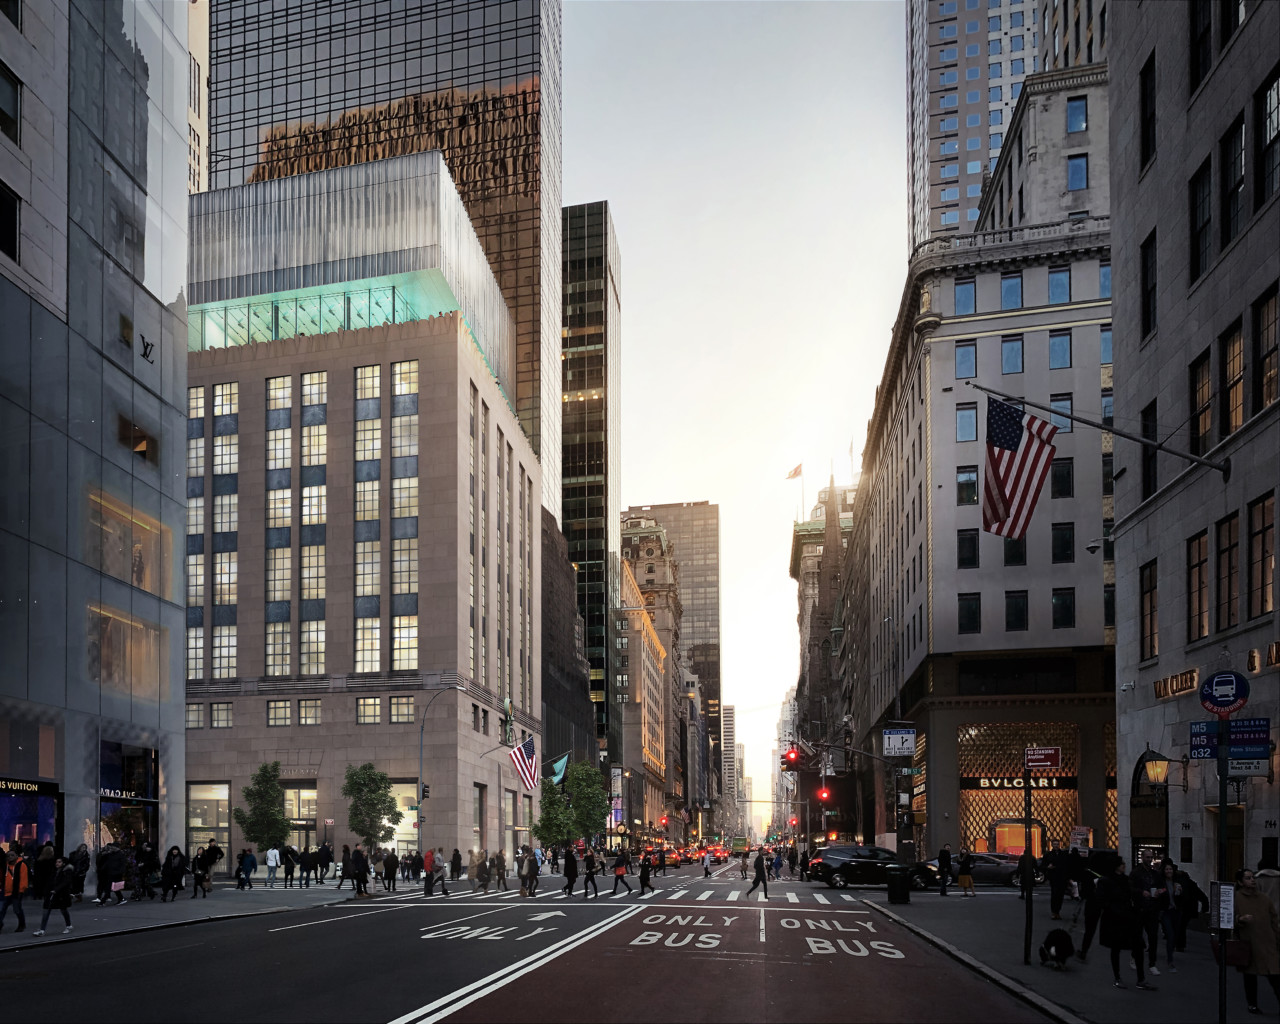 Street view rendering of a textured glass volume above a limestone-clad building in New York, the Tiffany headquarters